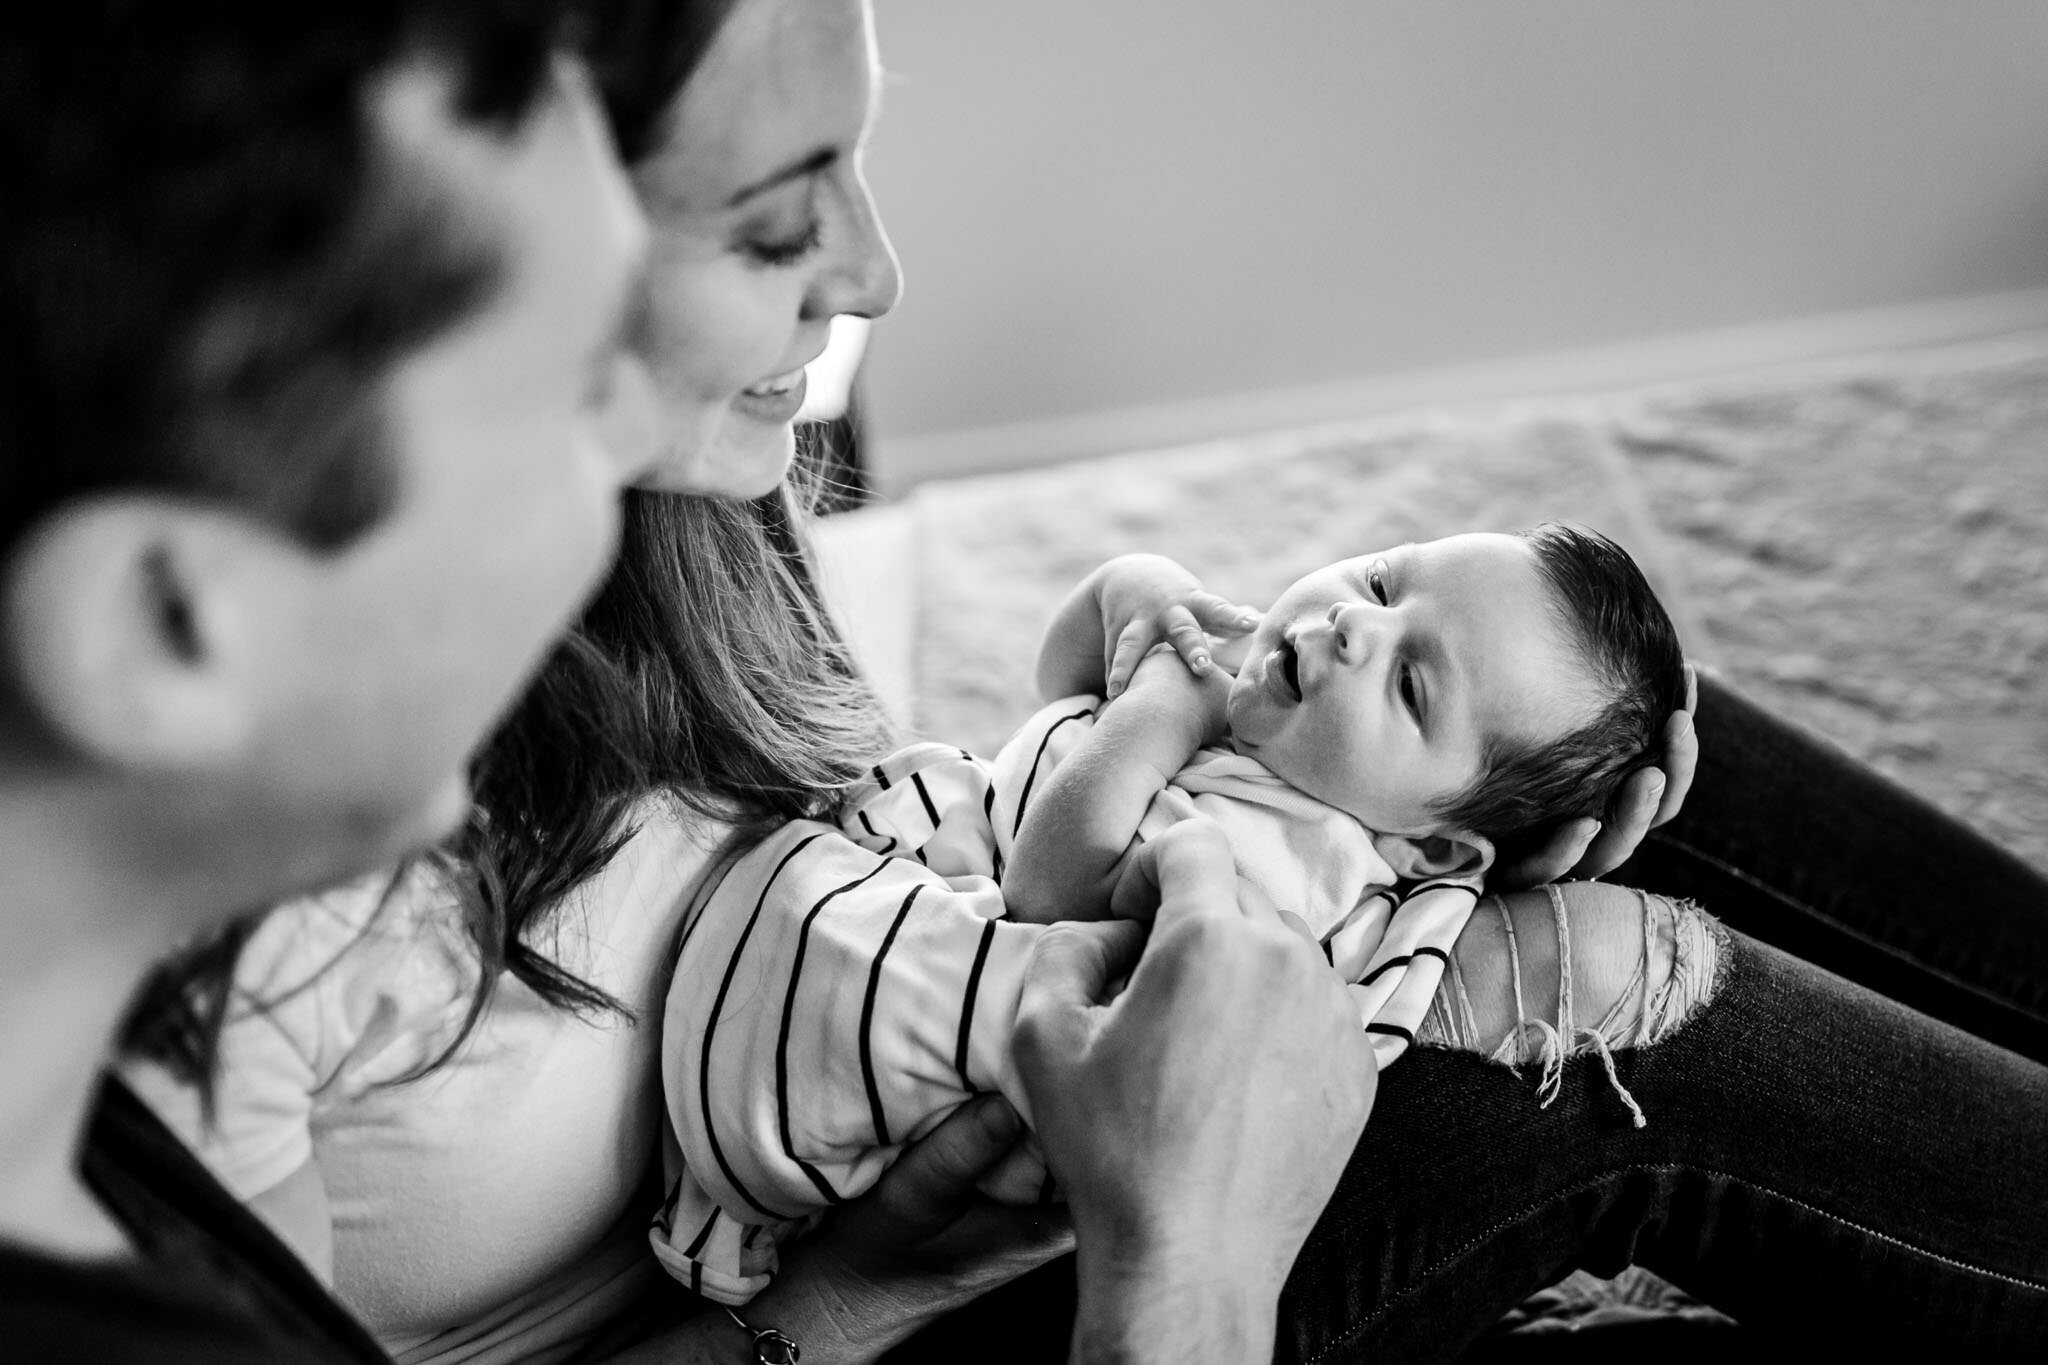 Durham Newborn Photographer | By G. Lin Photography | Black and white photo of baby smiling at parents